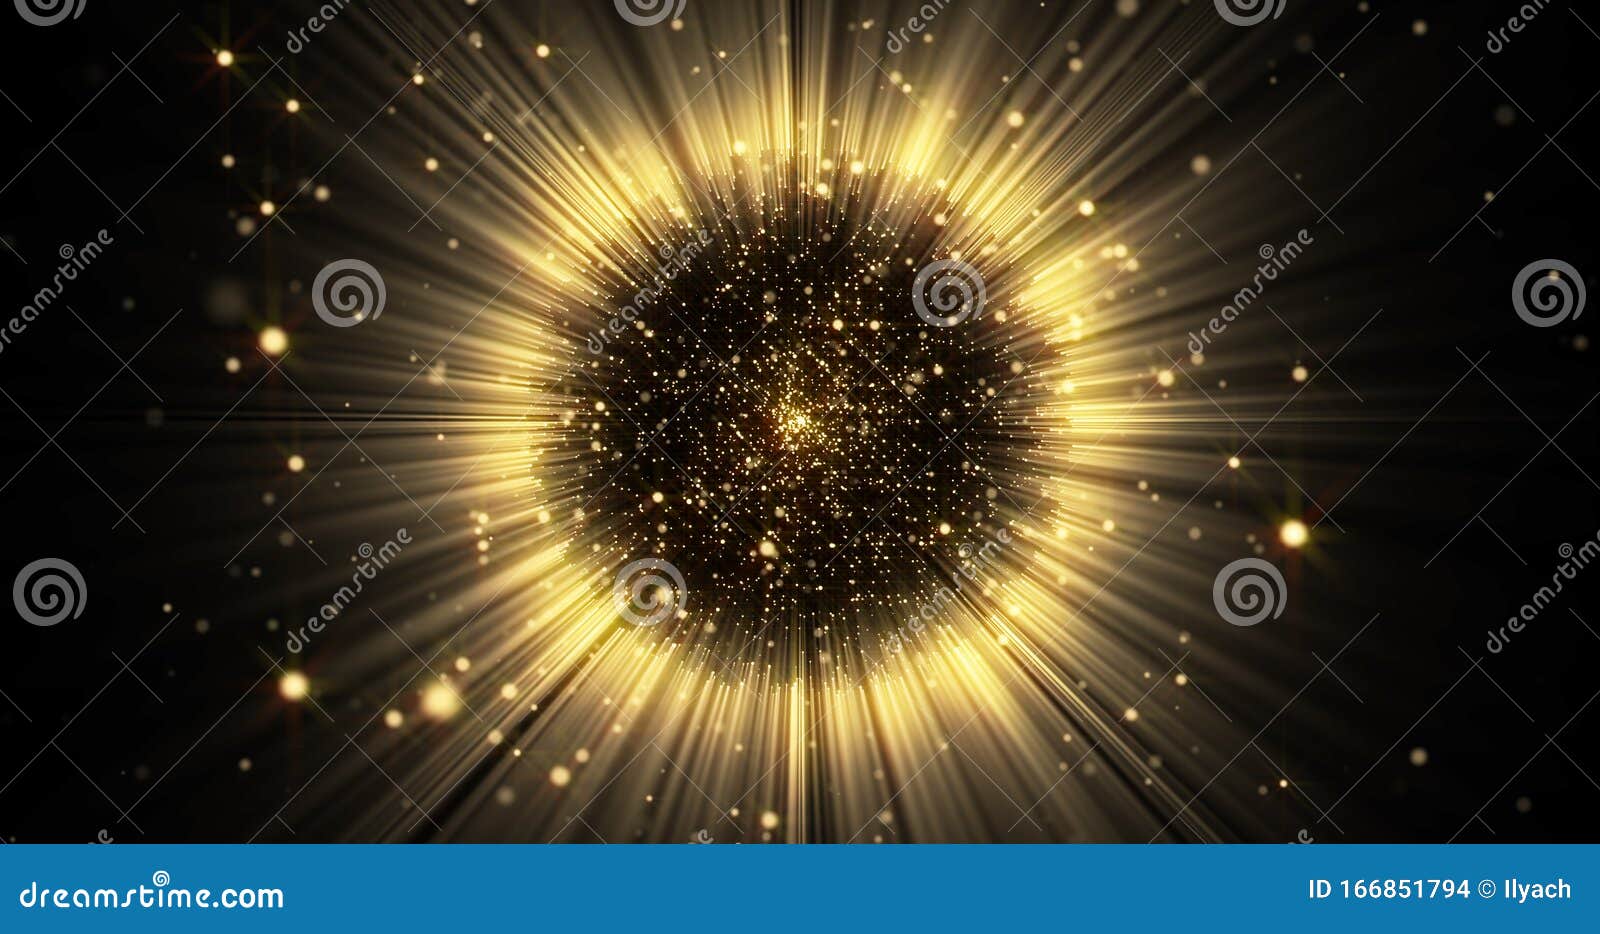 gold light sphere ball with glitter sparkles burst and glowing shimmer radiance explosion burst. magic glow sphere emitting golden